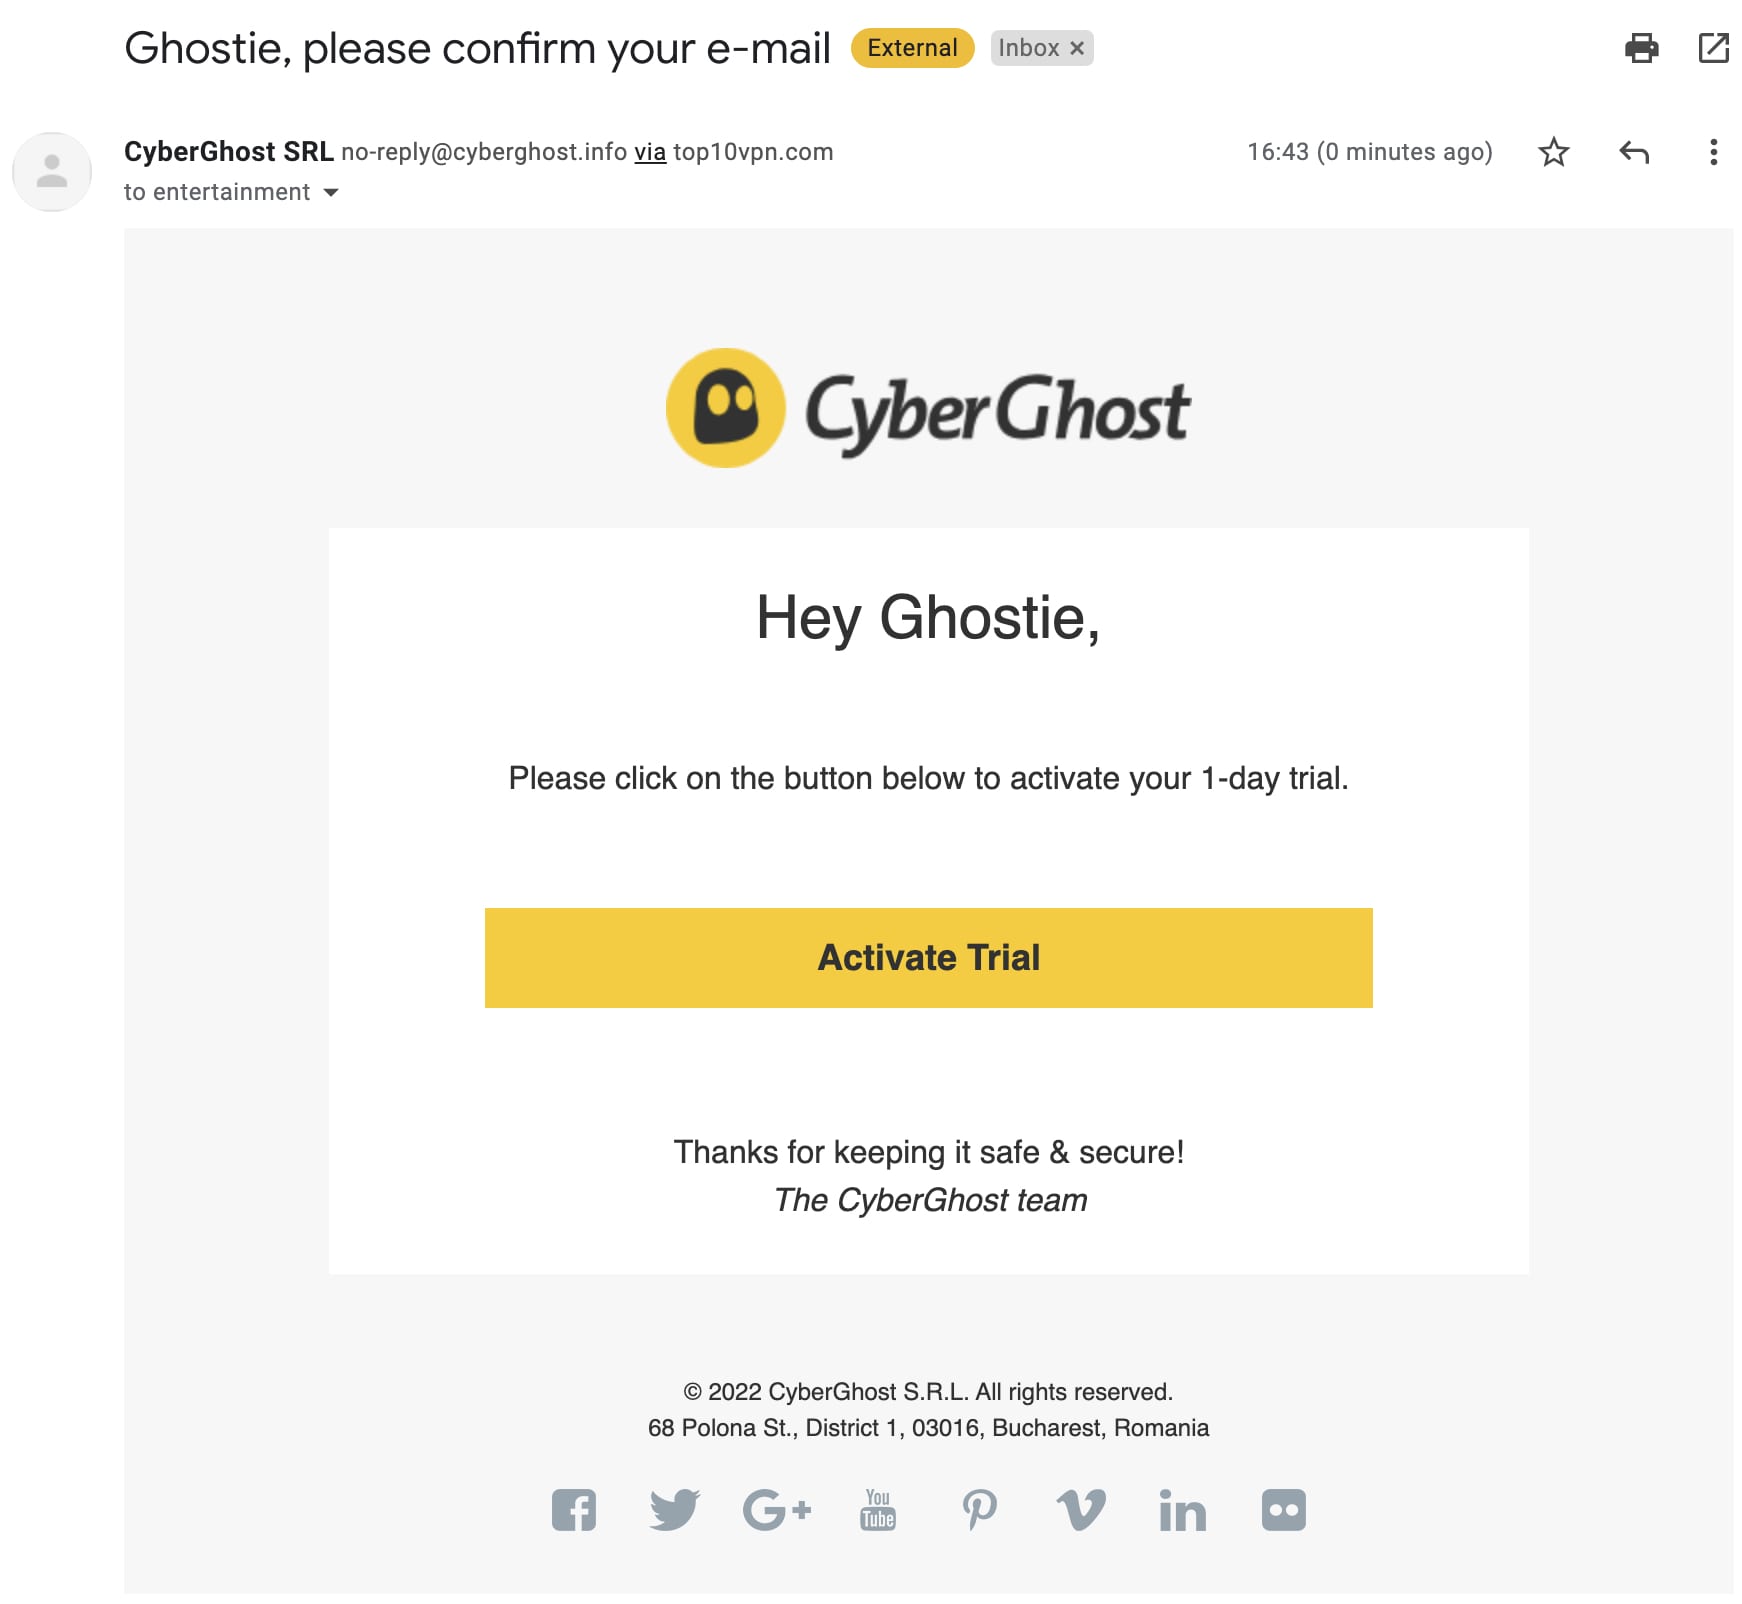 CyberGhost trial activation confirmation email